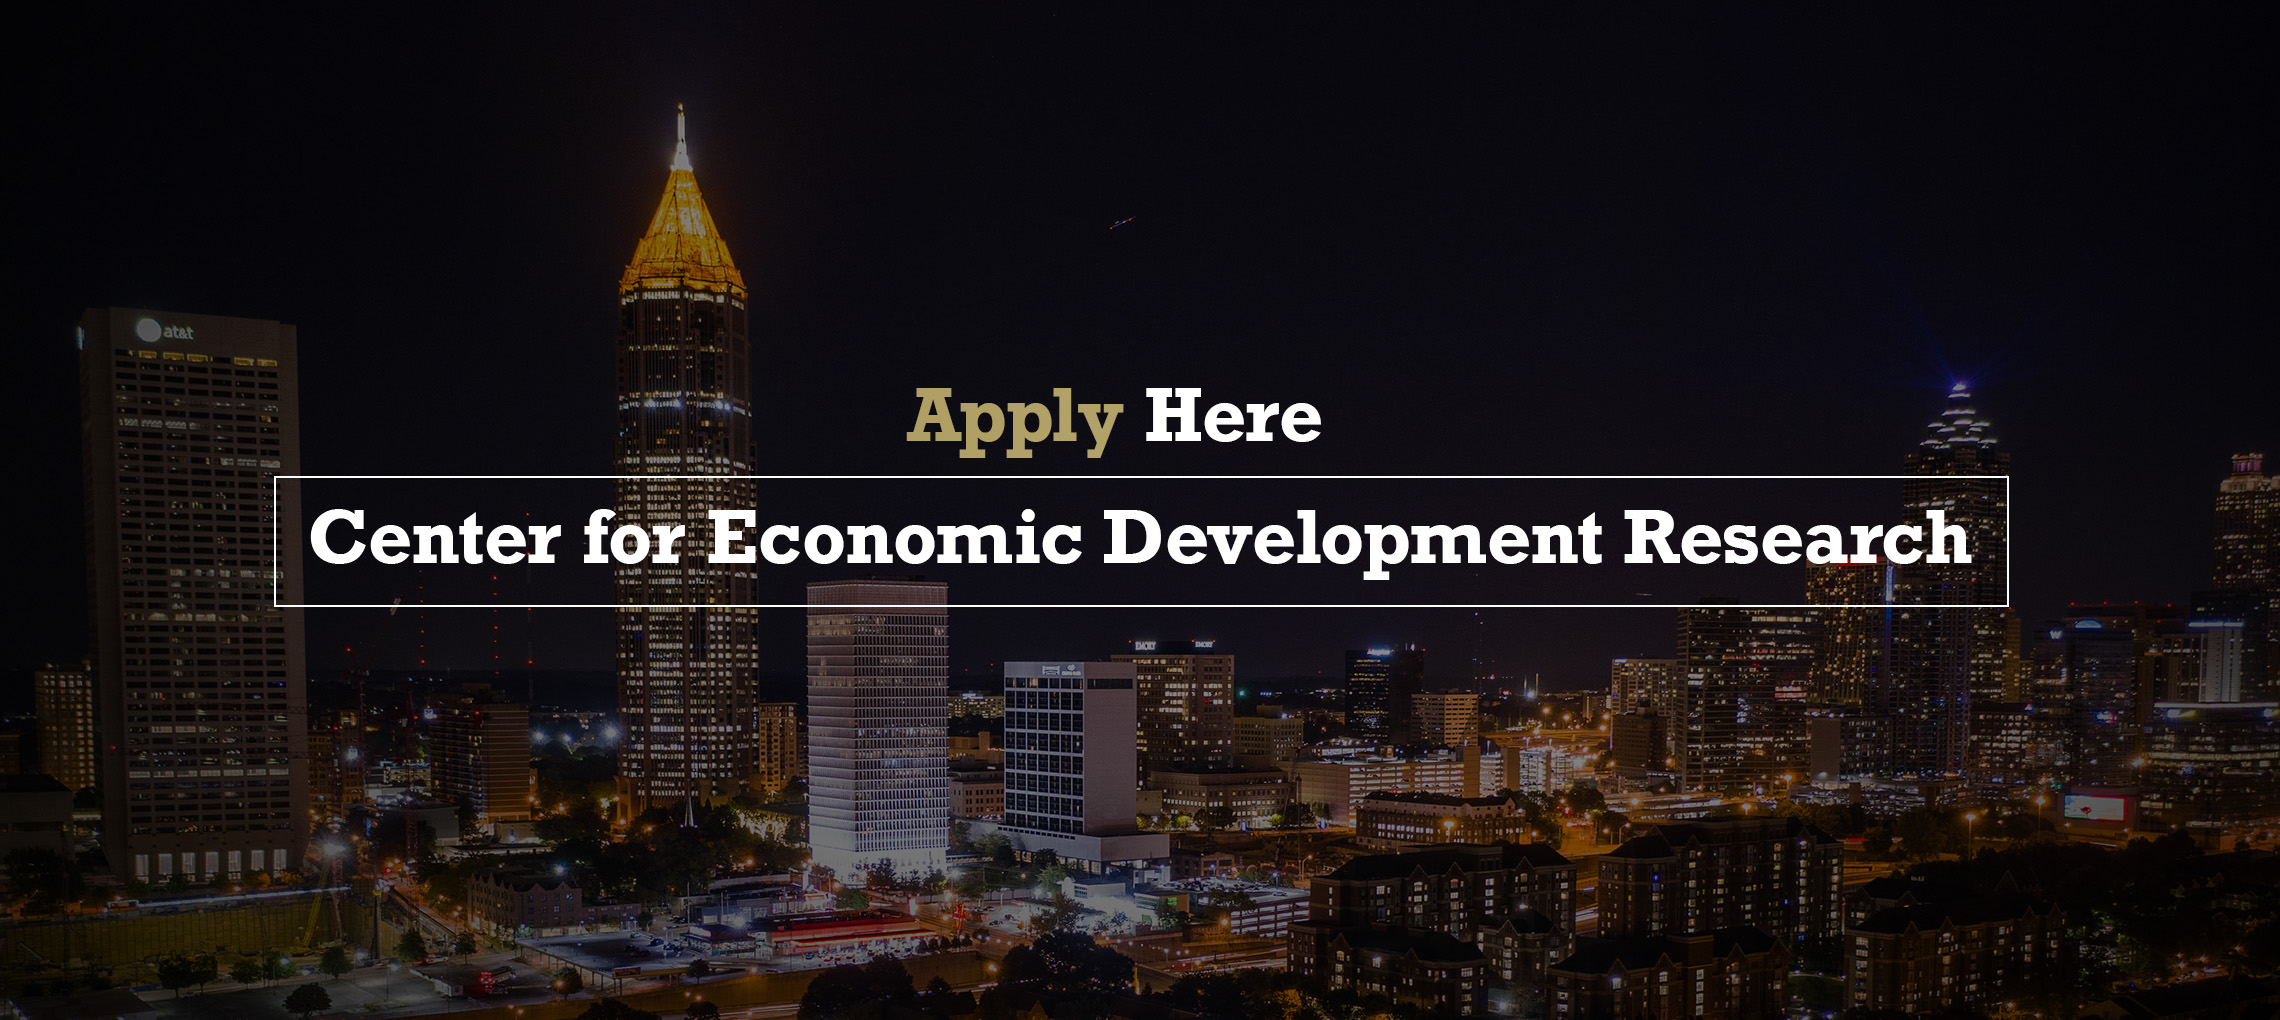 City skyline of Atlanta with "Apply Here" and "Center for Economic Development Research" in text.